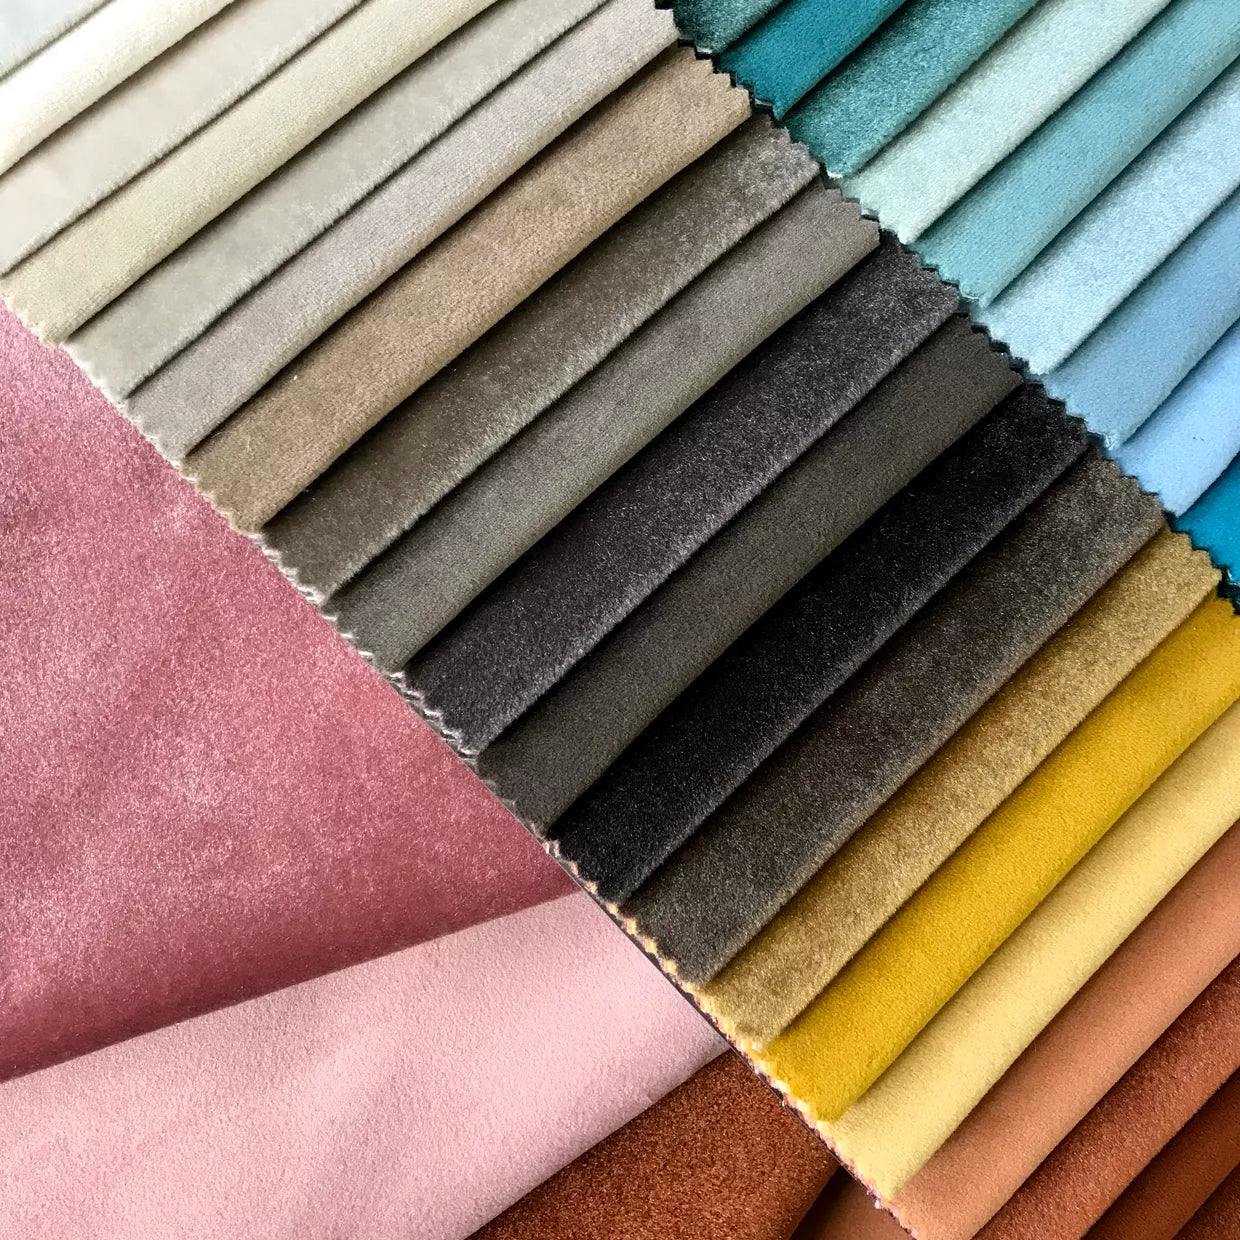 Best Upholstery Fabric To Balance Style And Practicality, 57% OFF